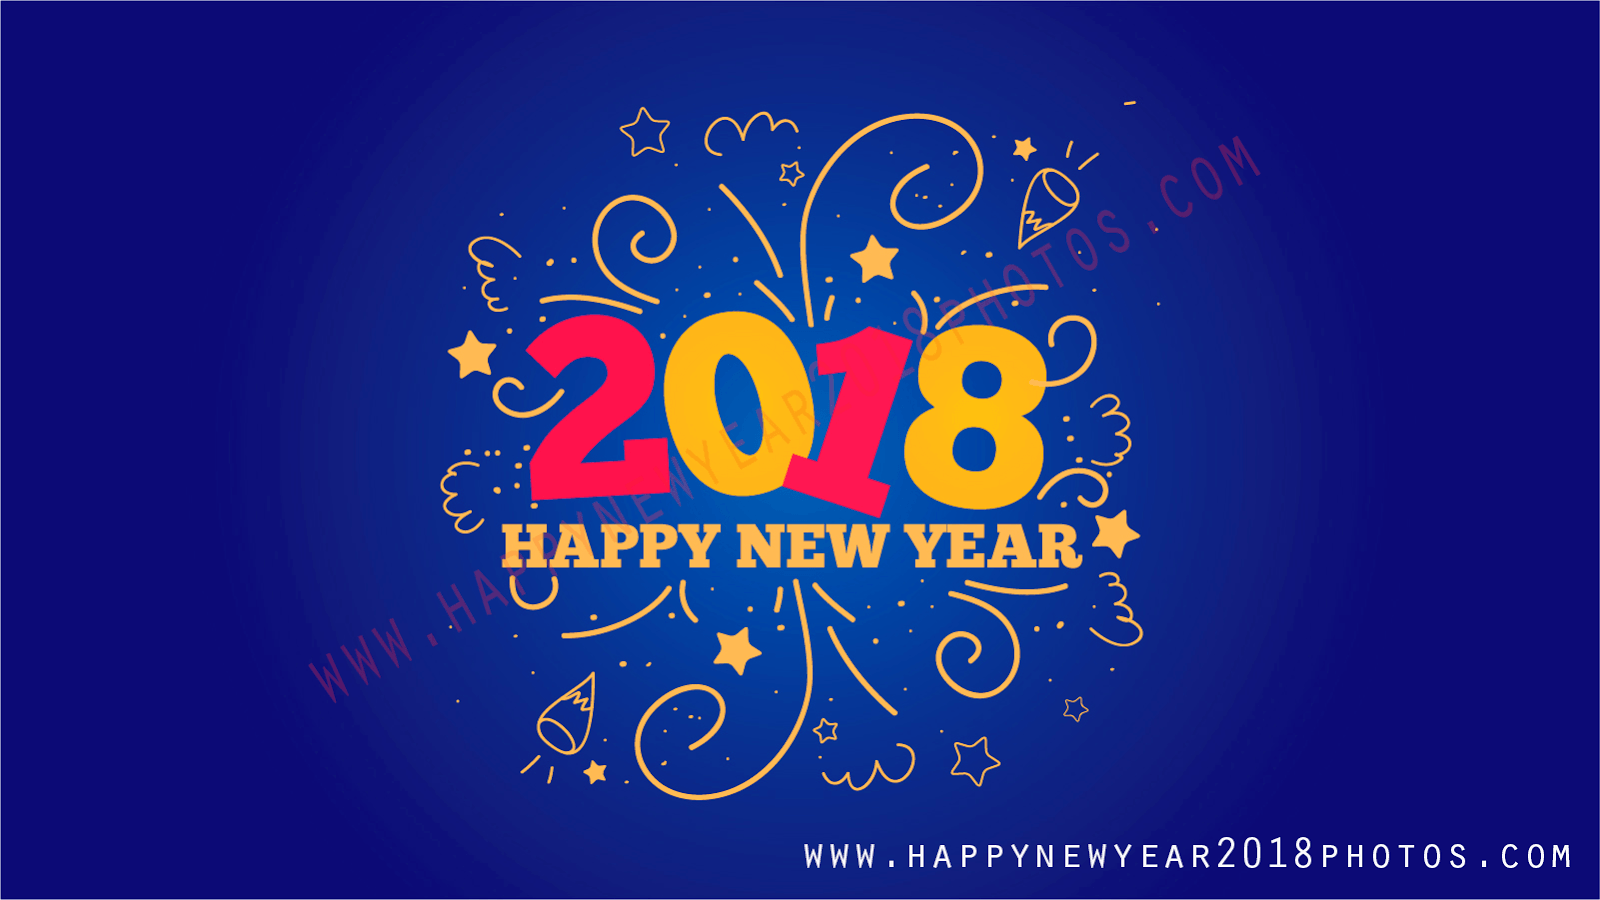 Happy New Year 2018 Wallpaper Image Wishes Messages Quotes